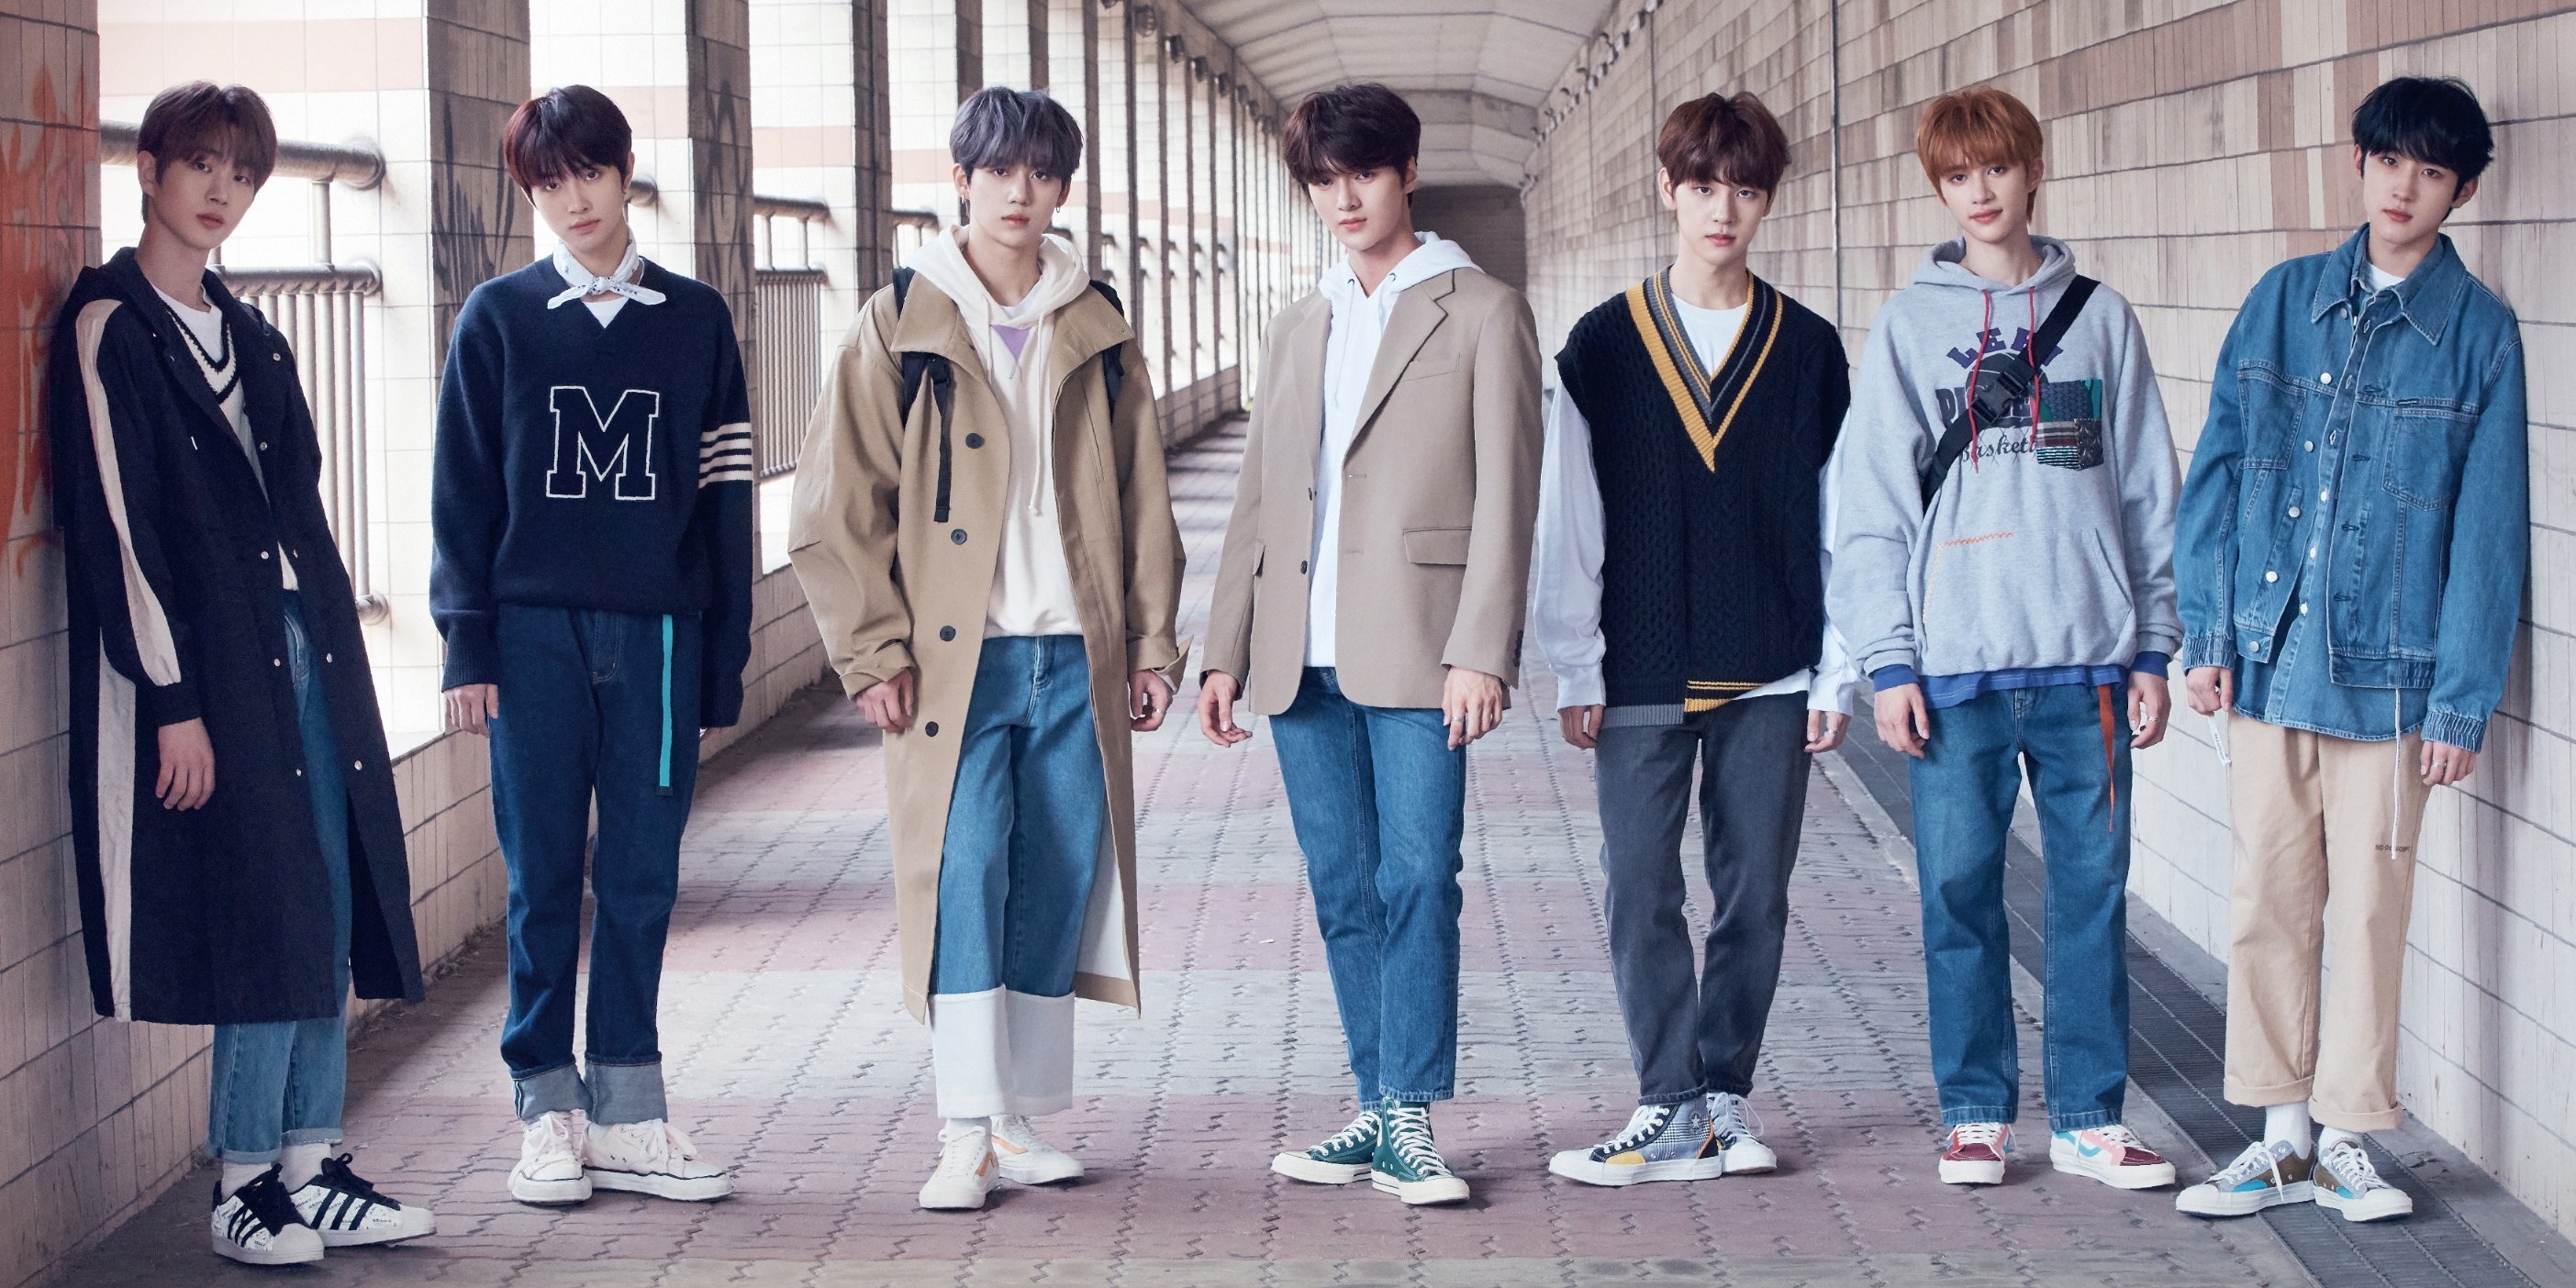 Profile and Interesting Facts About the 7 Members of DRIPPIN, the New Boyband from Woollim Entertainment with Exceptional Talent